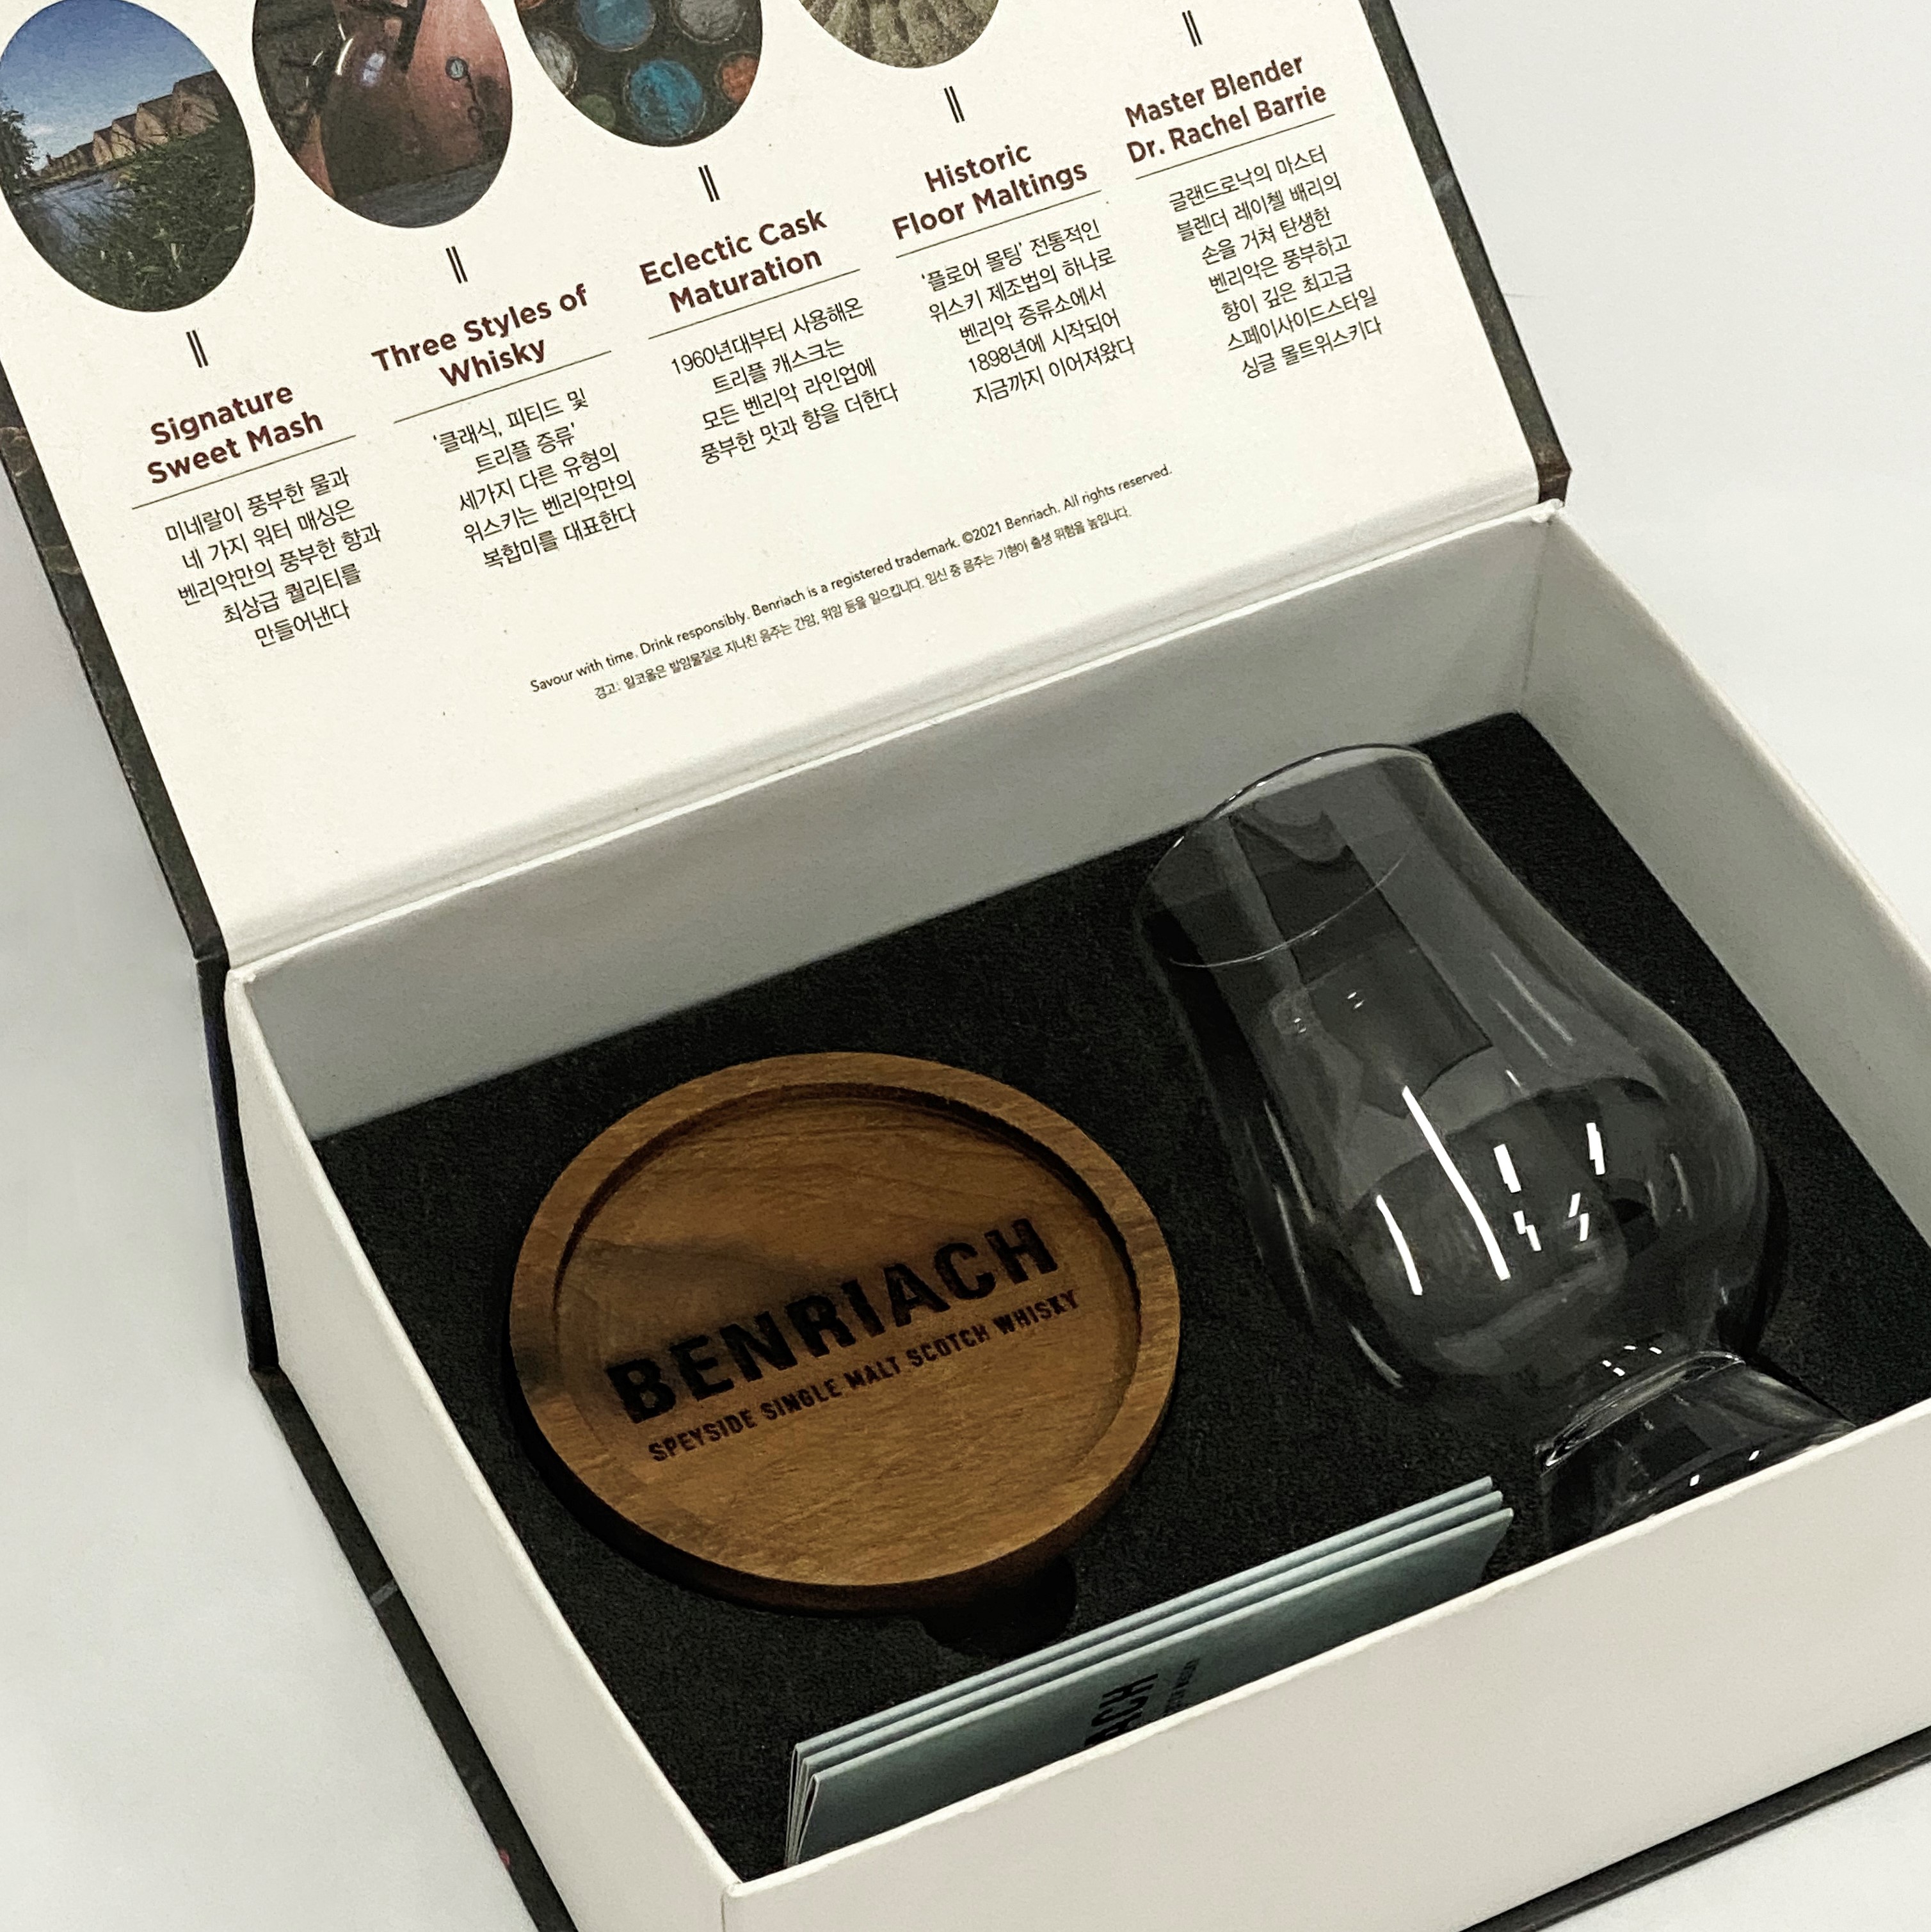 Benriach Event Gift 2021